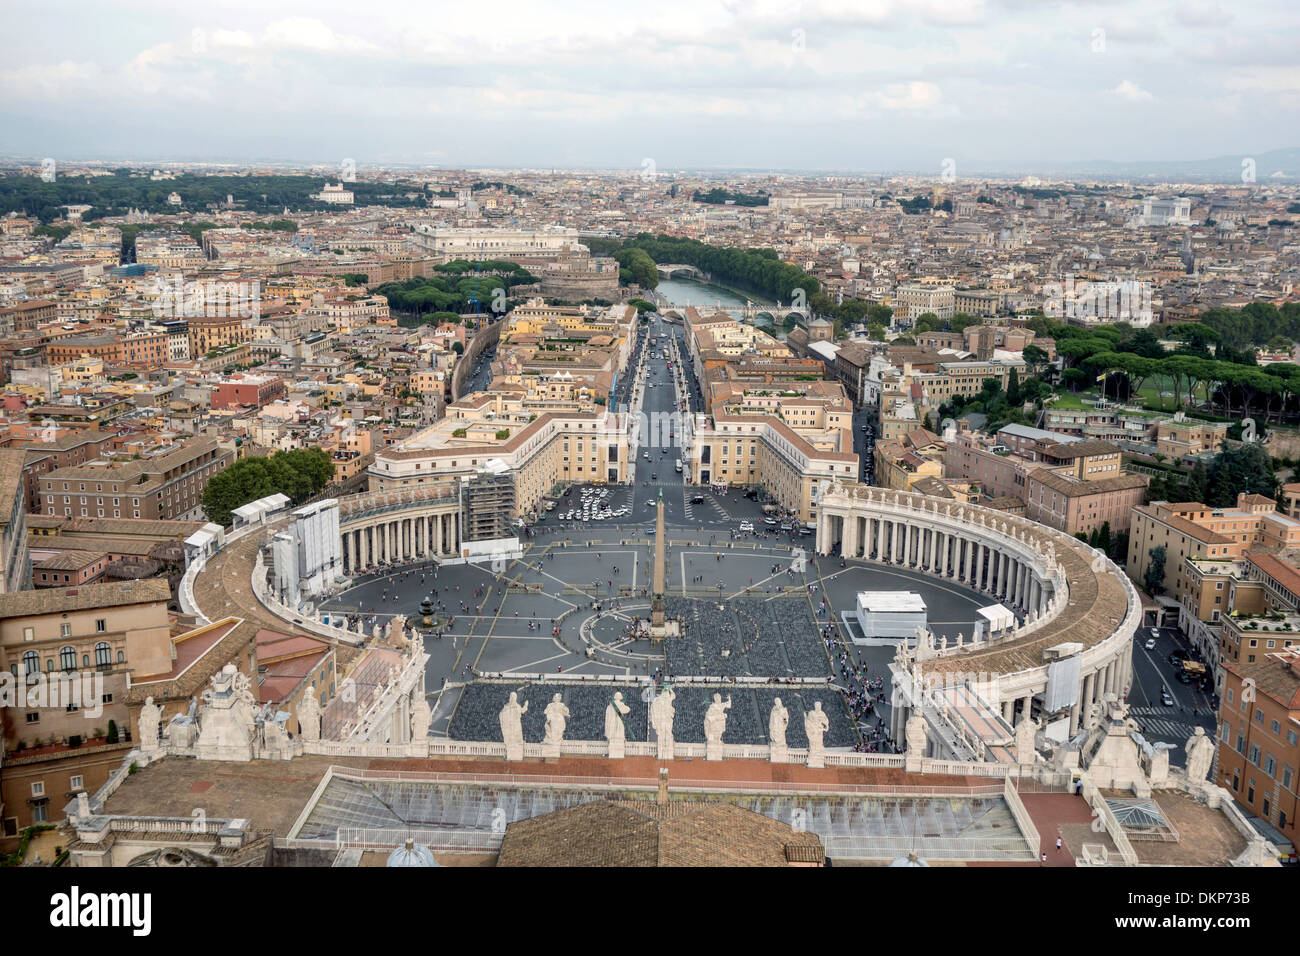 Panorama view of St Peter's Square,Rome, Italy Stock Photo